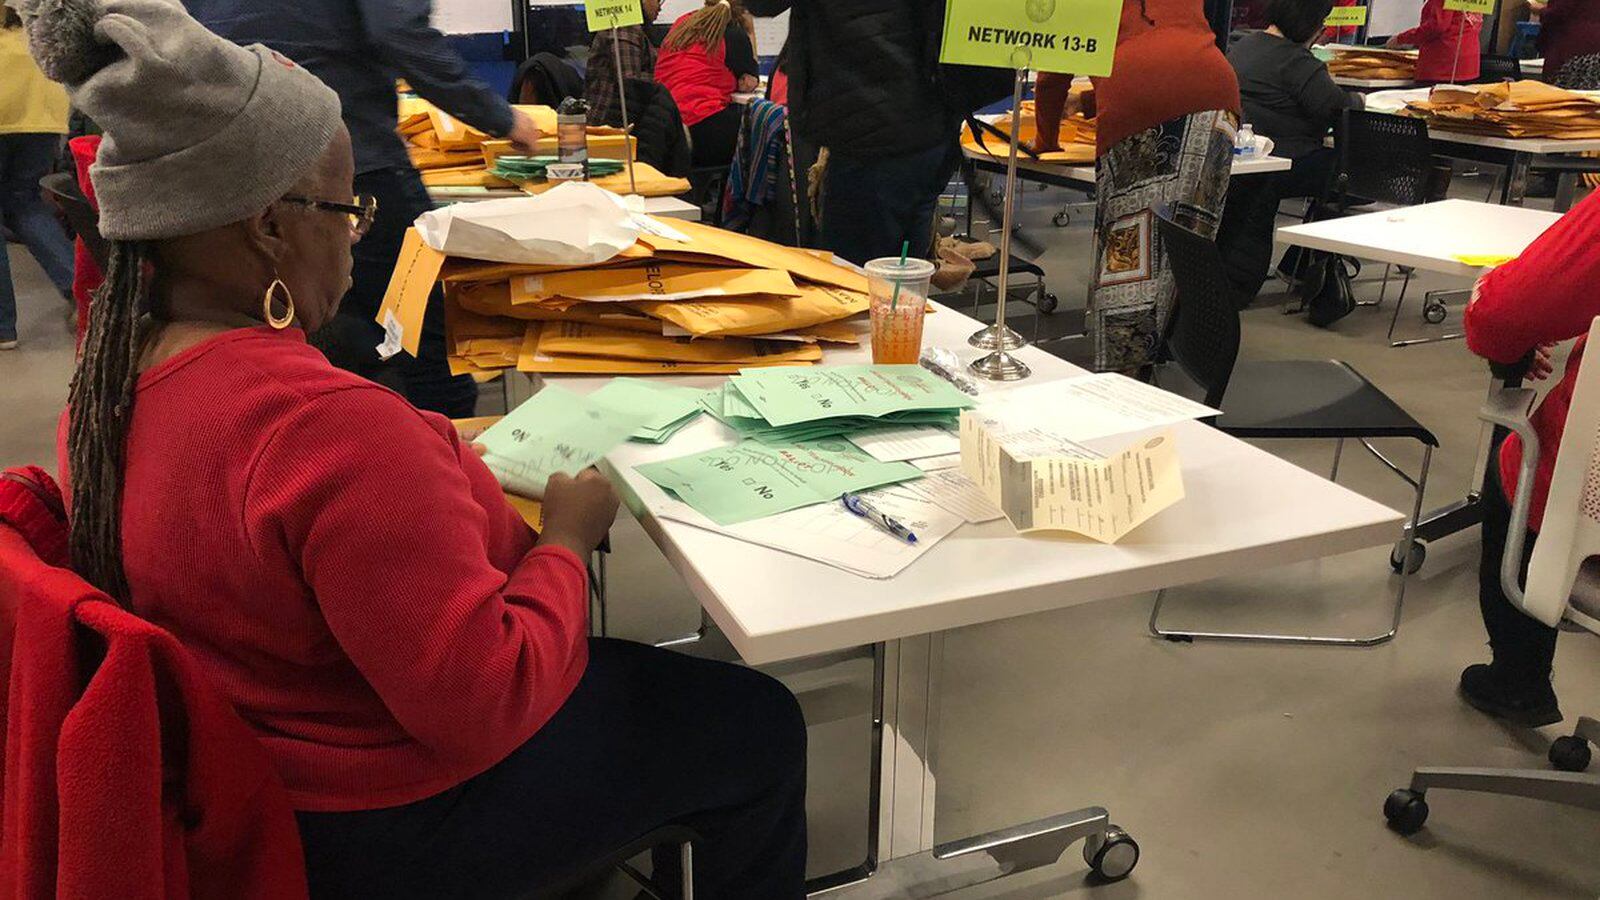 Counting the votes on the compromise agreement at Chicago Teachers Union headquarters.